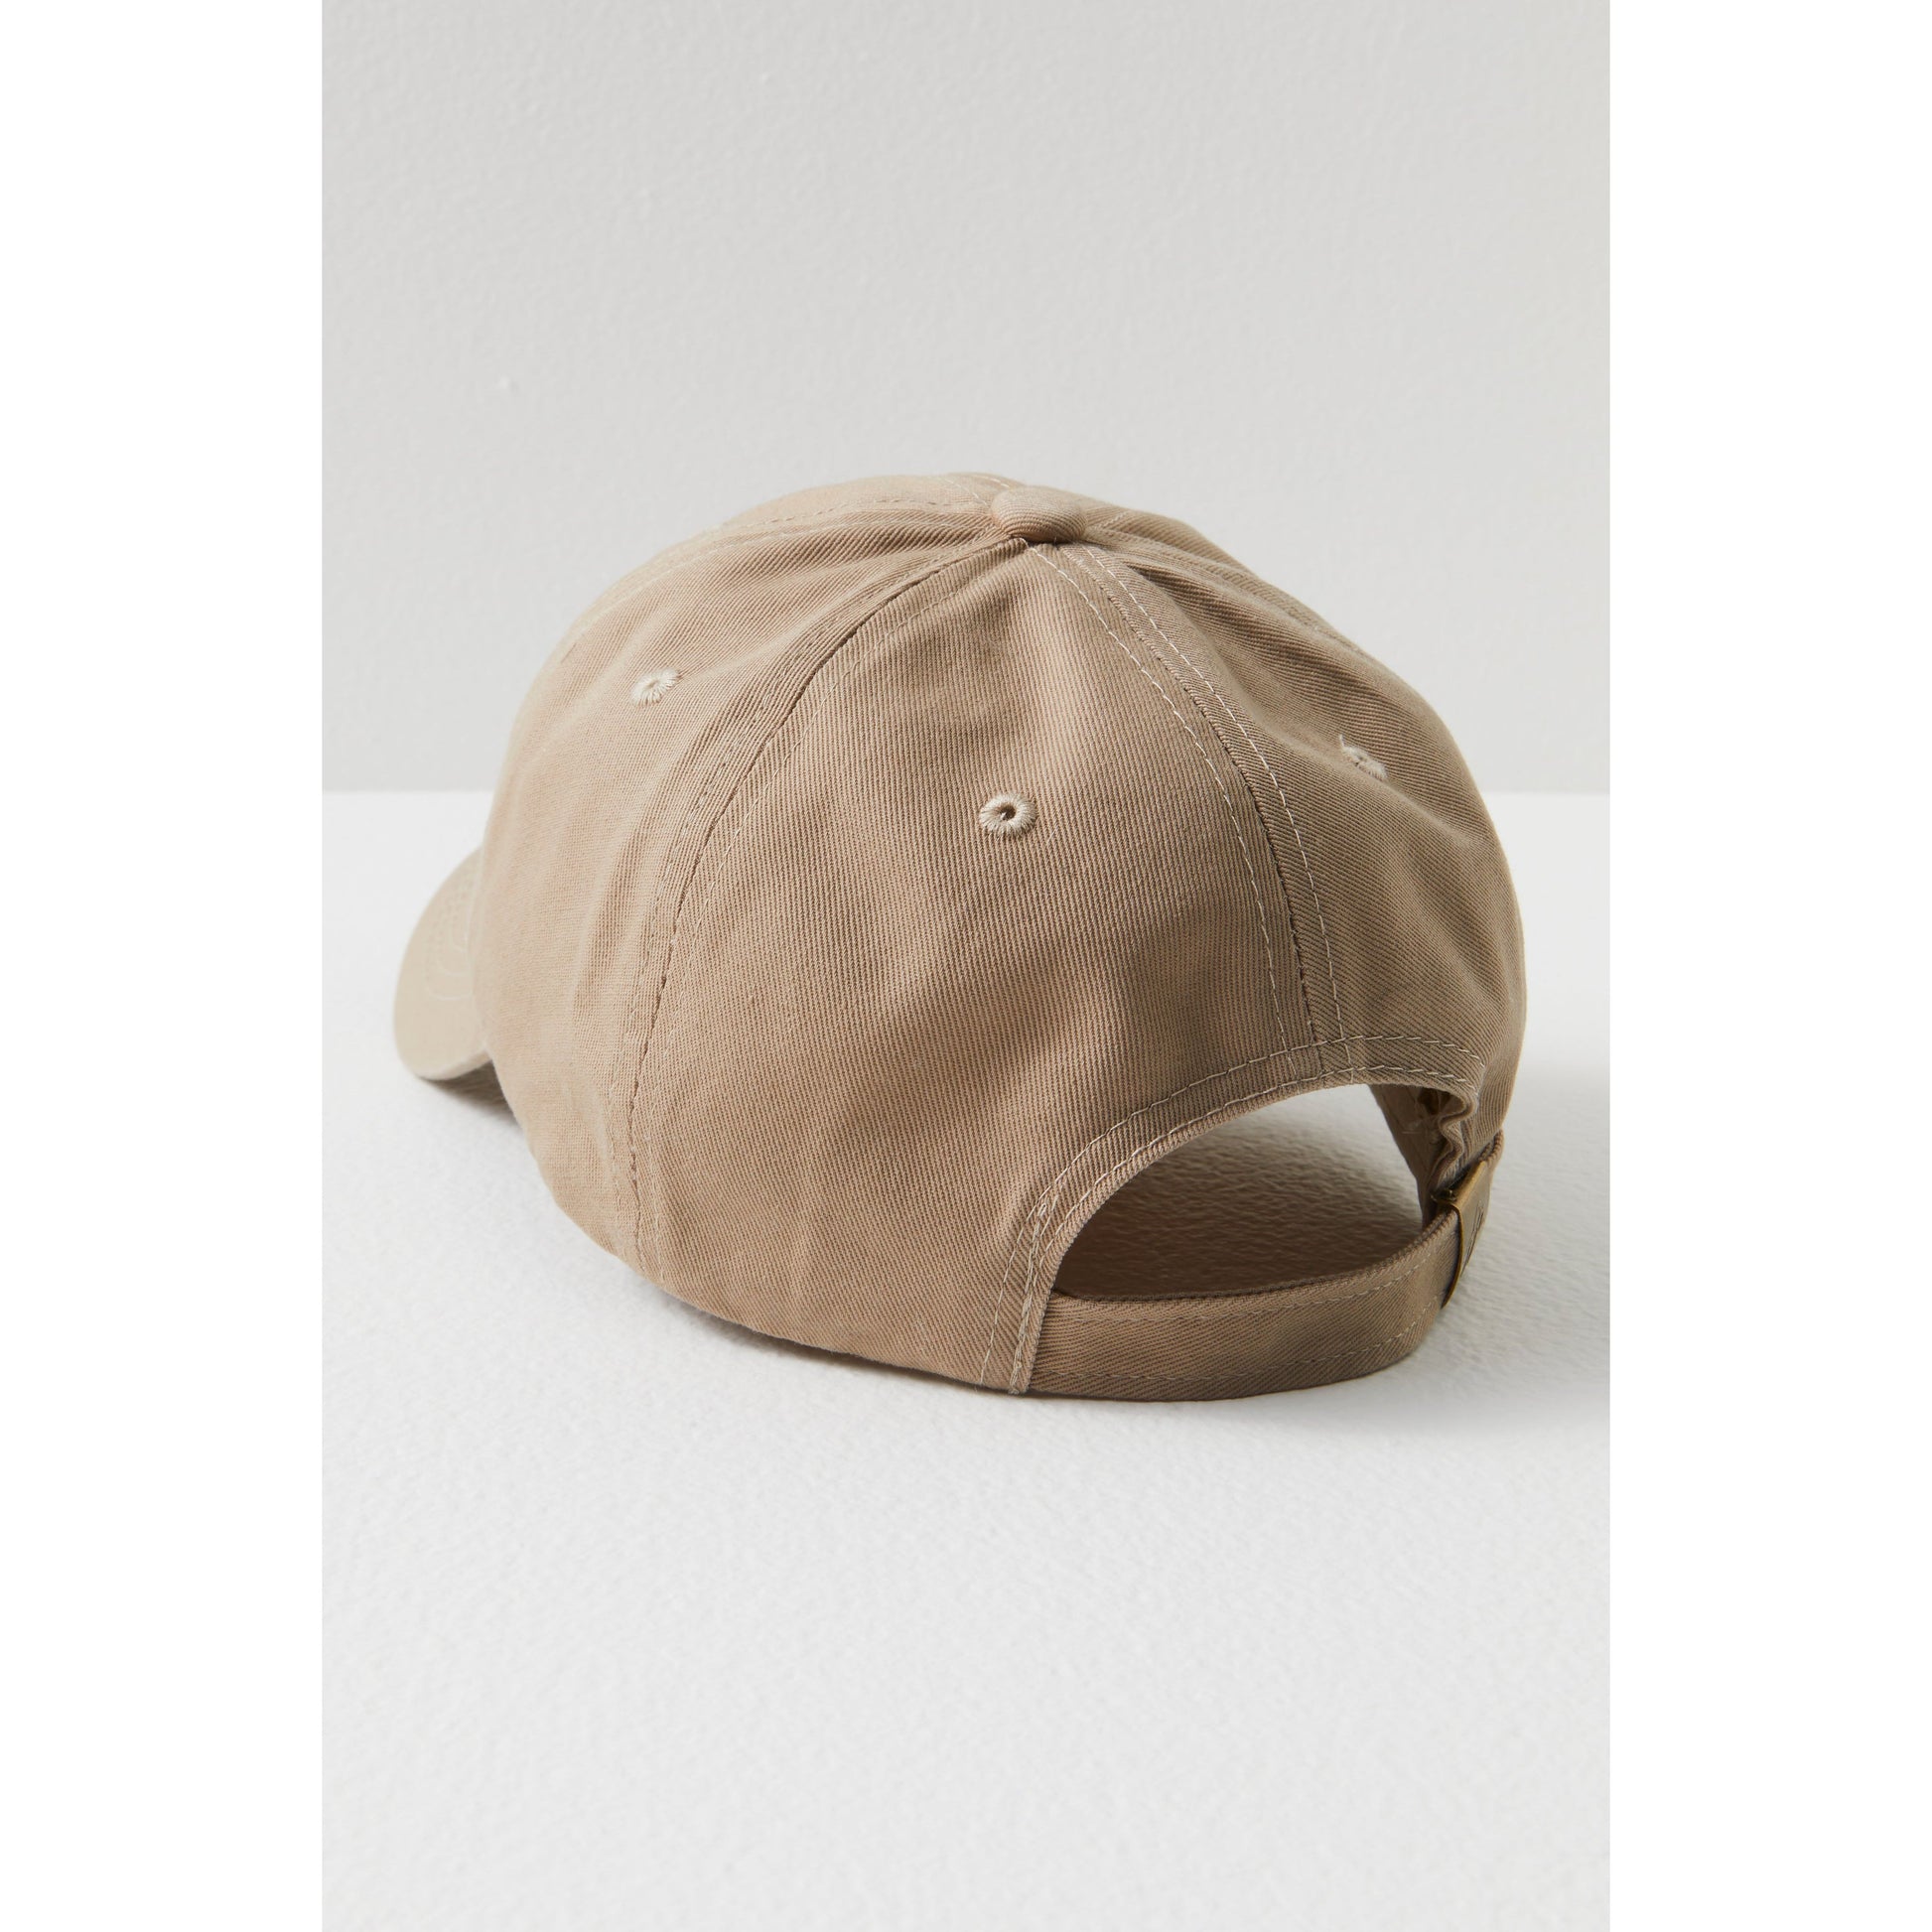 A beige Big Buti Baseball Cap with Free People Movement logo stitching details and adjustable fit, displayed side-view against a white background.